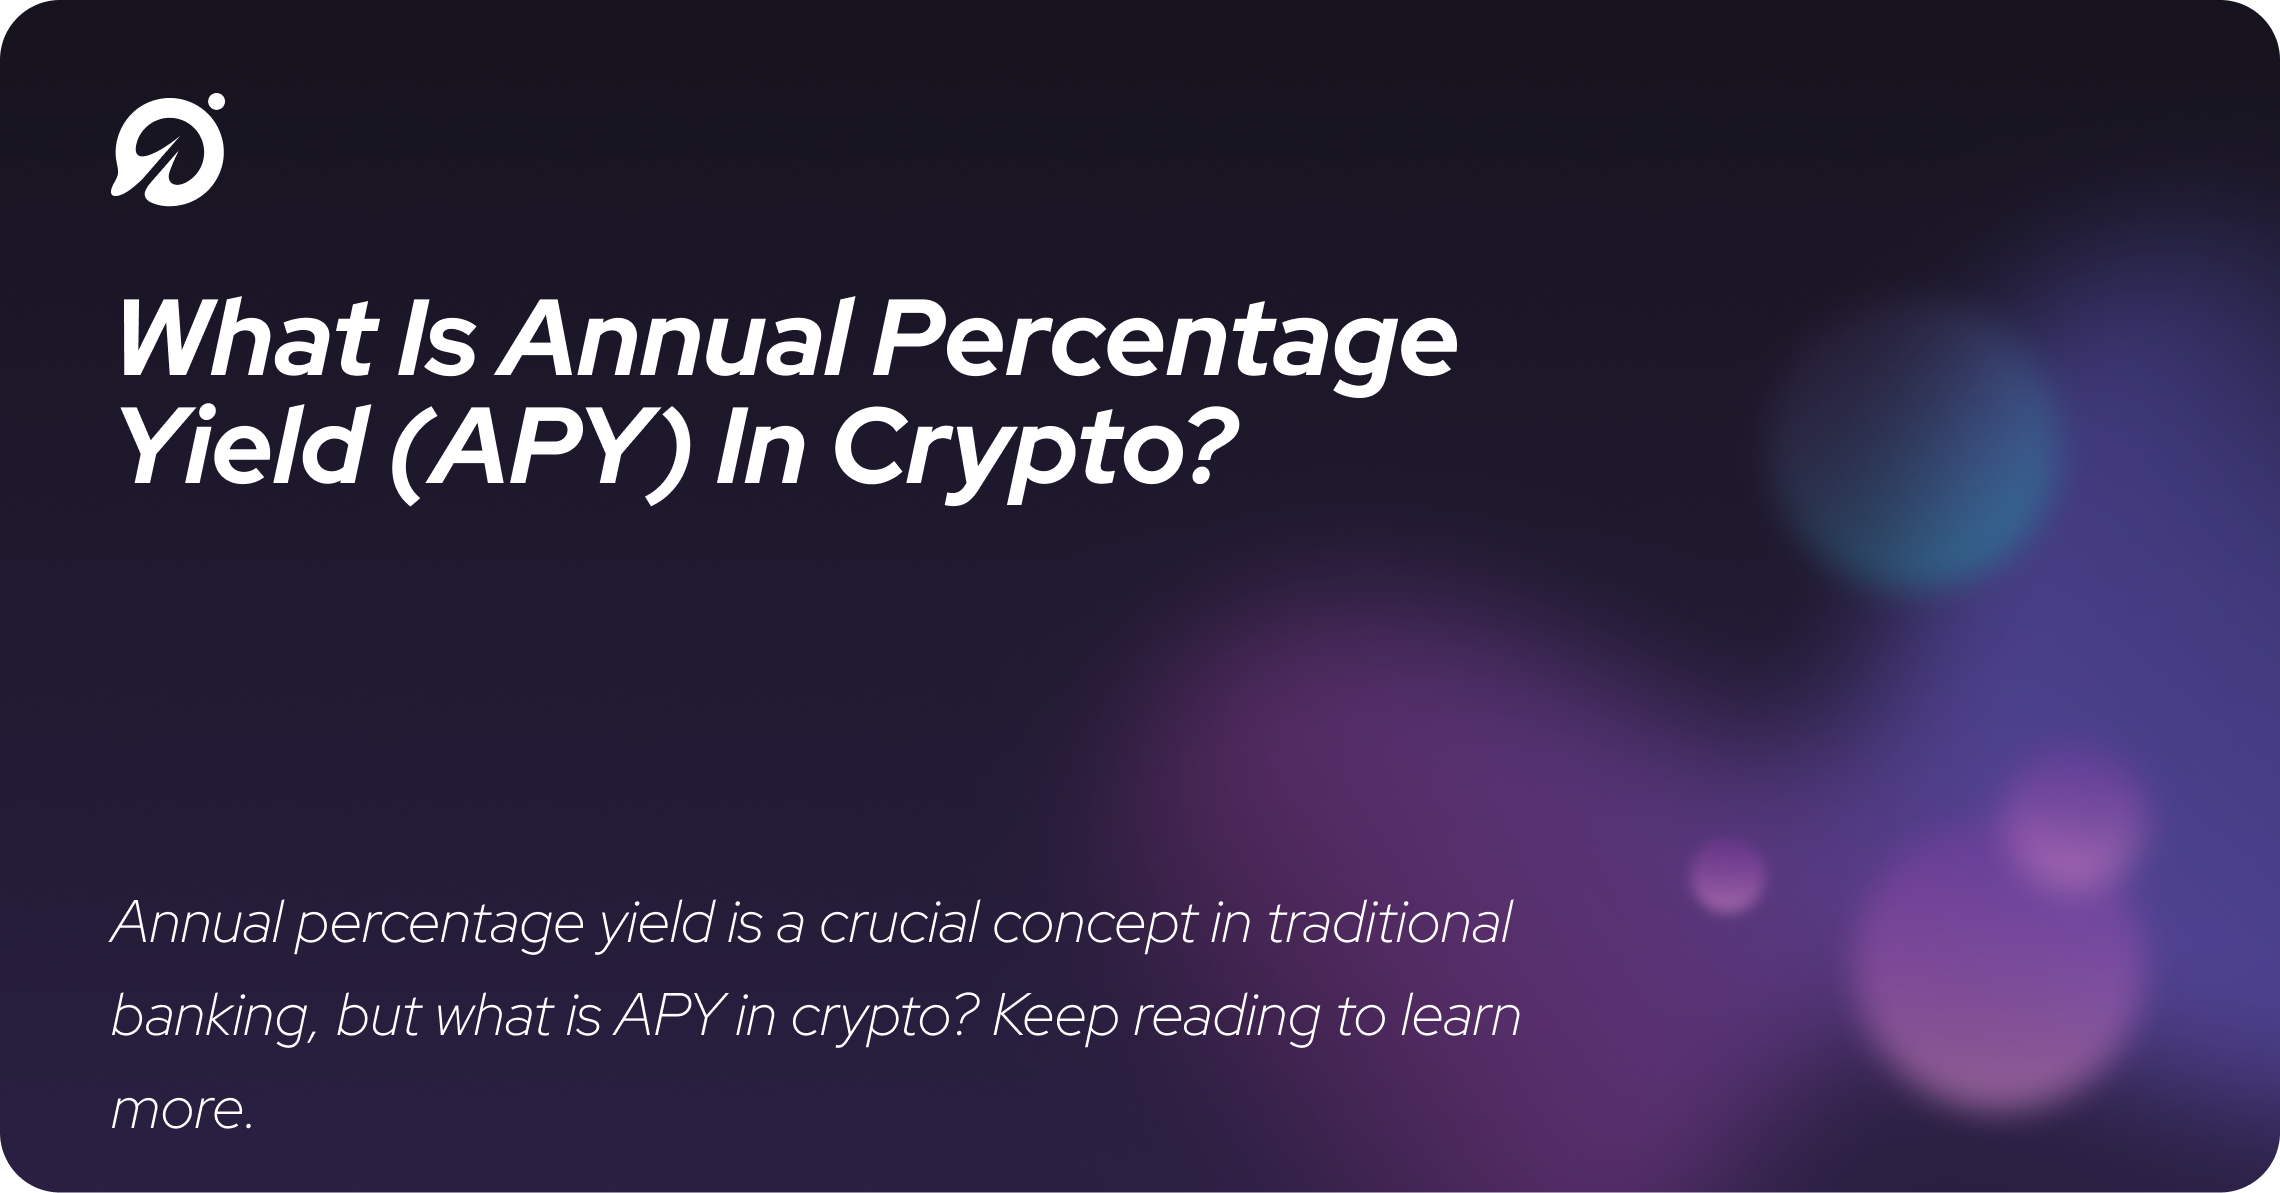 What Is Annual Percentage Yield (APY) In Crypto?